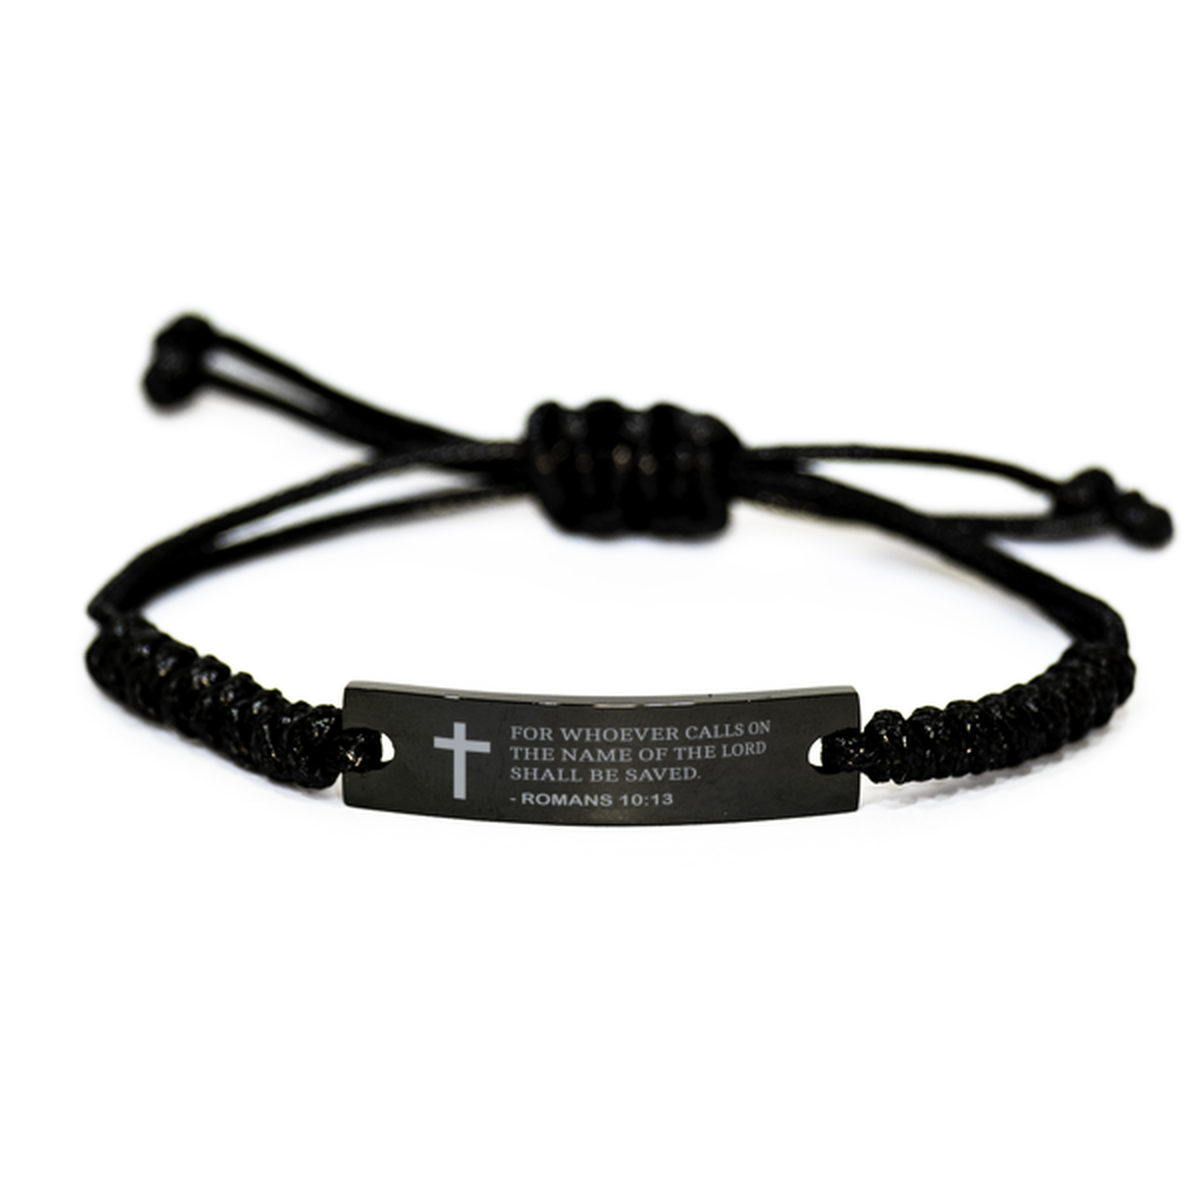 Bible Verse Rope Bracelet, Romans 10:13 For Whoever Calls On The Name Of The Lord Shall, Christian Encouraging Gifts For Men Women Boys Girls